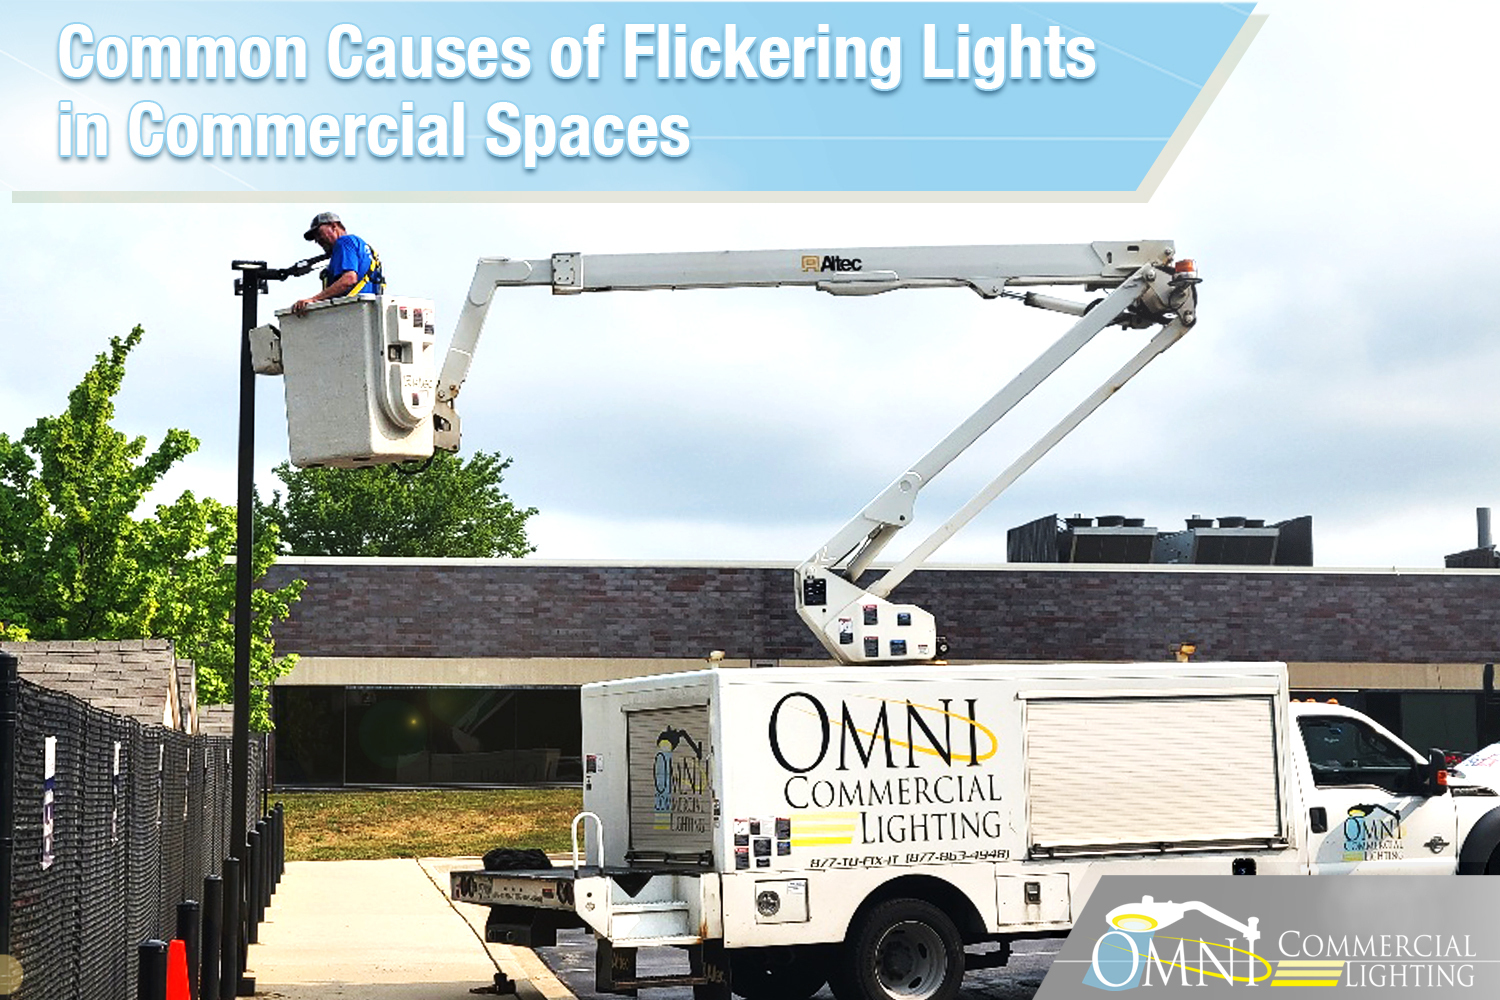 Common Causes of Flickering Lights in Commercial Spaces